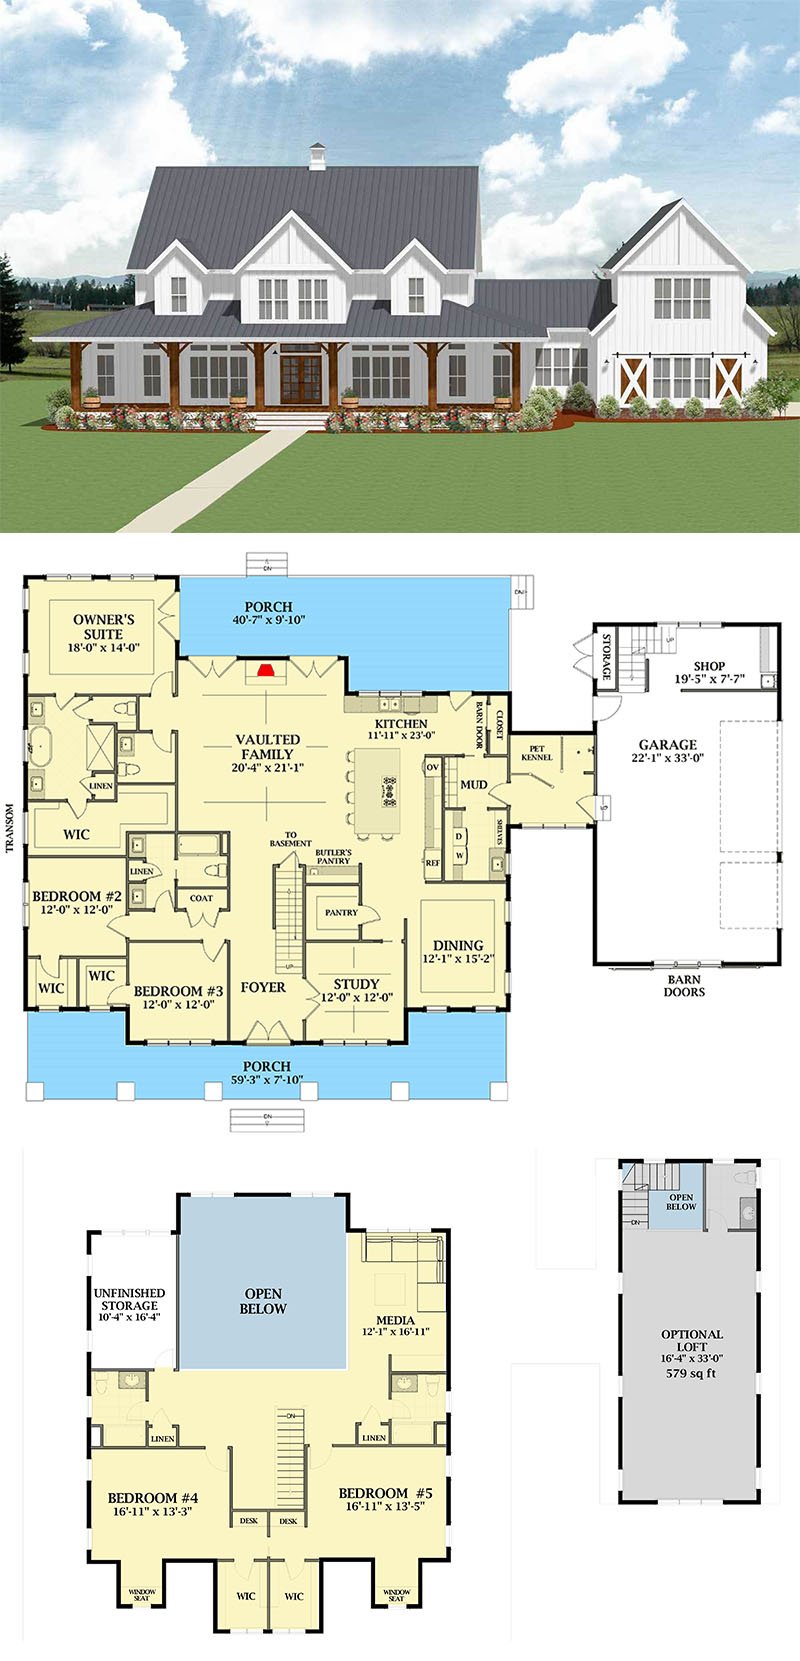 Most Popular Farmhouse Plans - Blueprints, layouts and details of the best farmhouses on the market. Building your dream home in the country? Get all your needs here! #farmhouseplans #farmhouse #blueprints #layouts